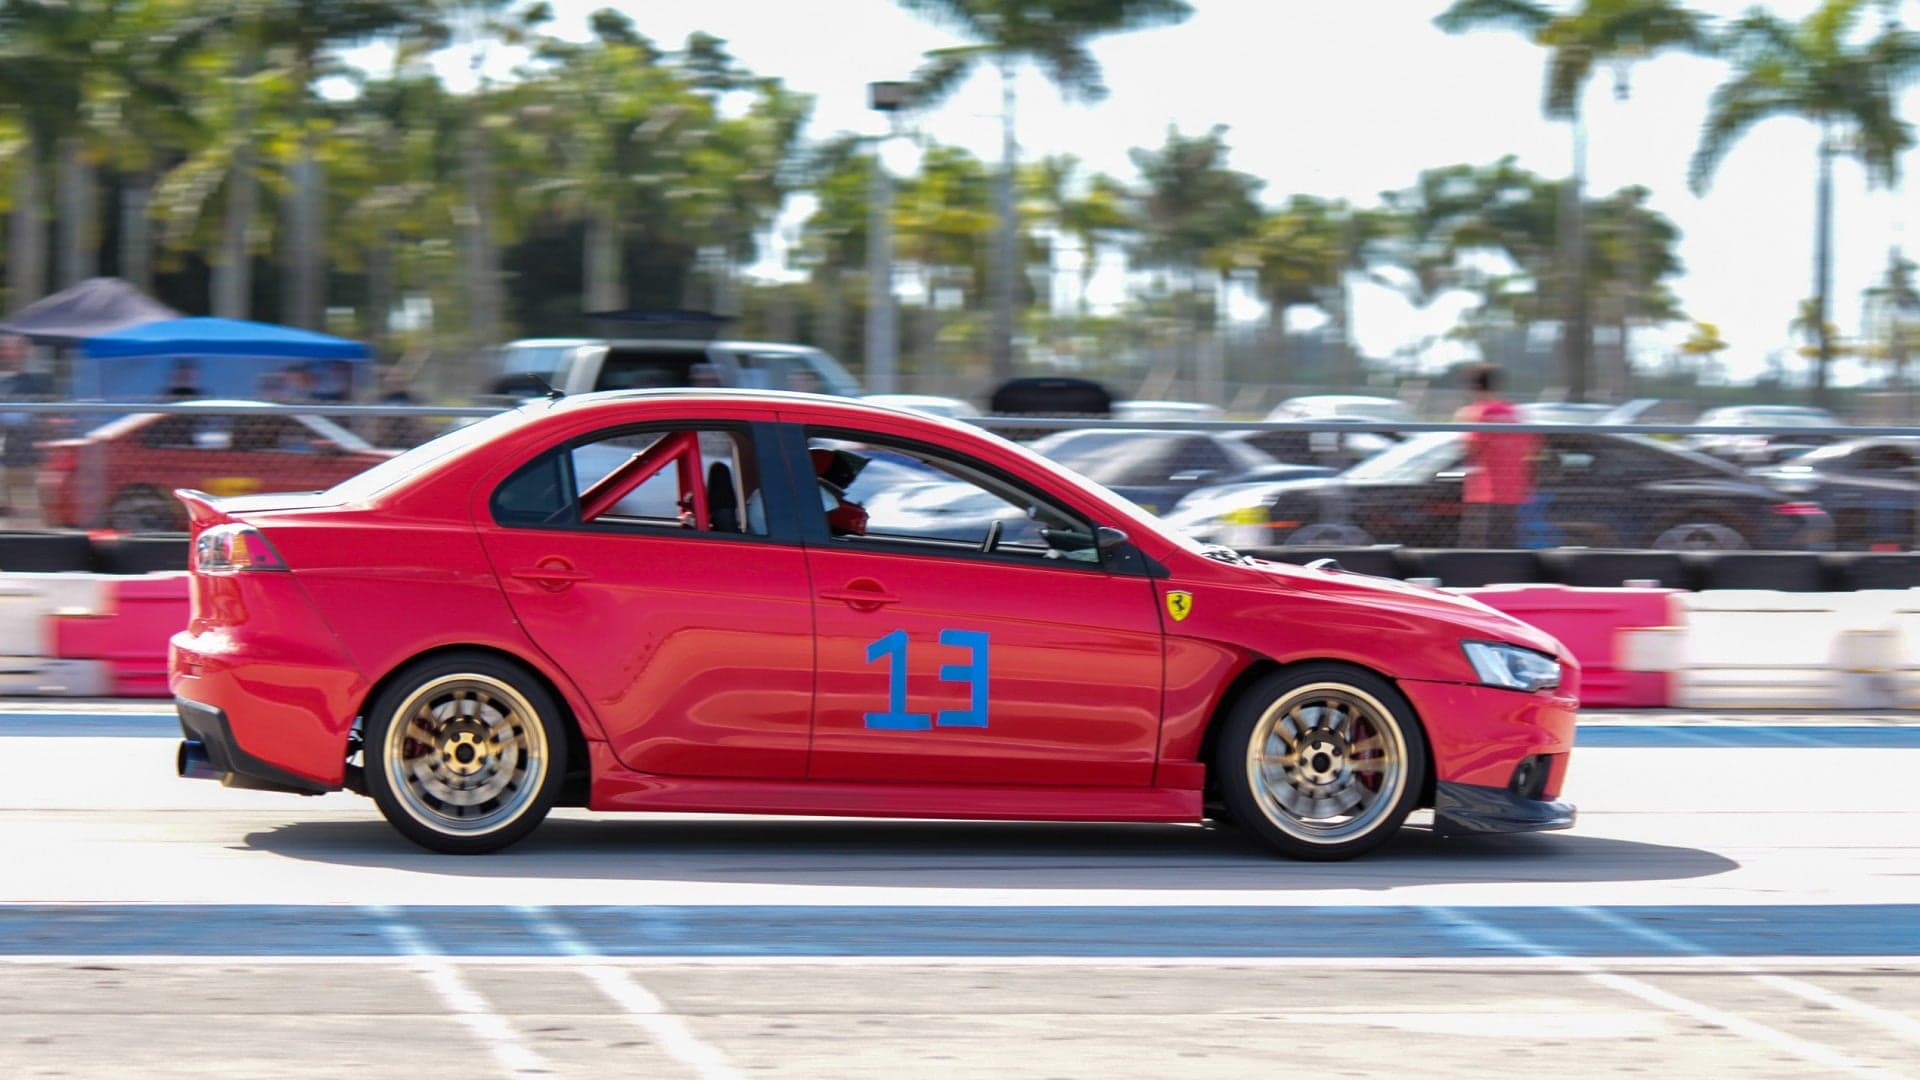 ‘Street Racing Made Safe’ Gives Florida Enthusiasts a Better Place to Speed